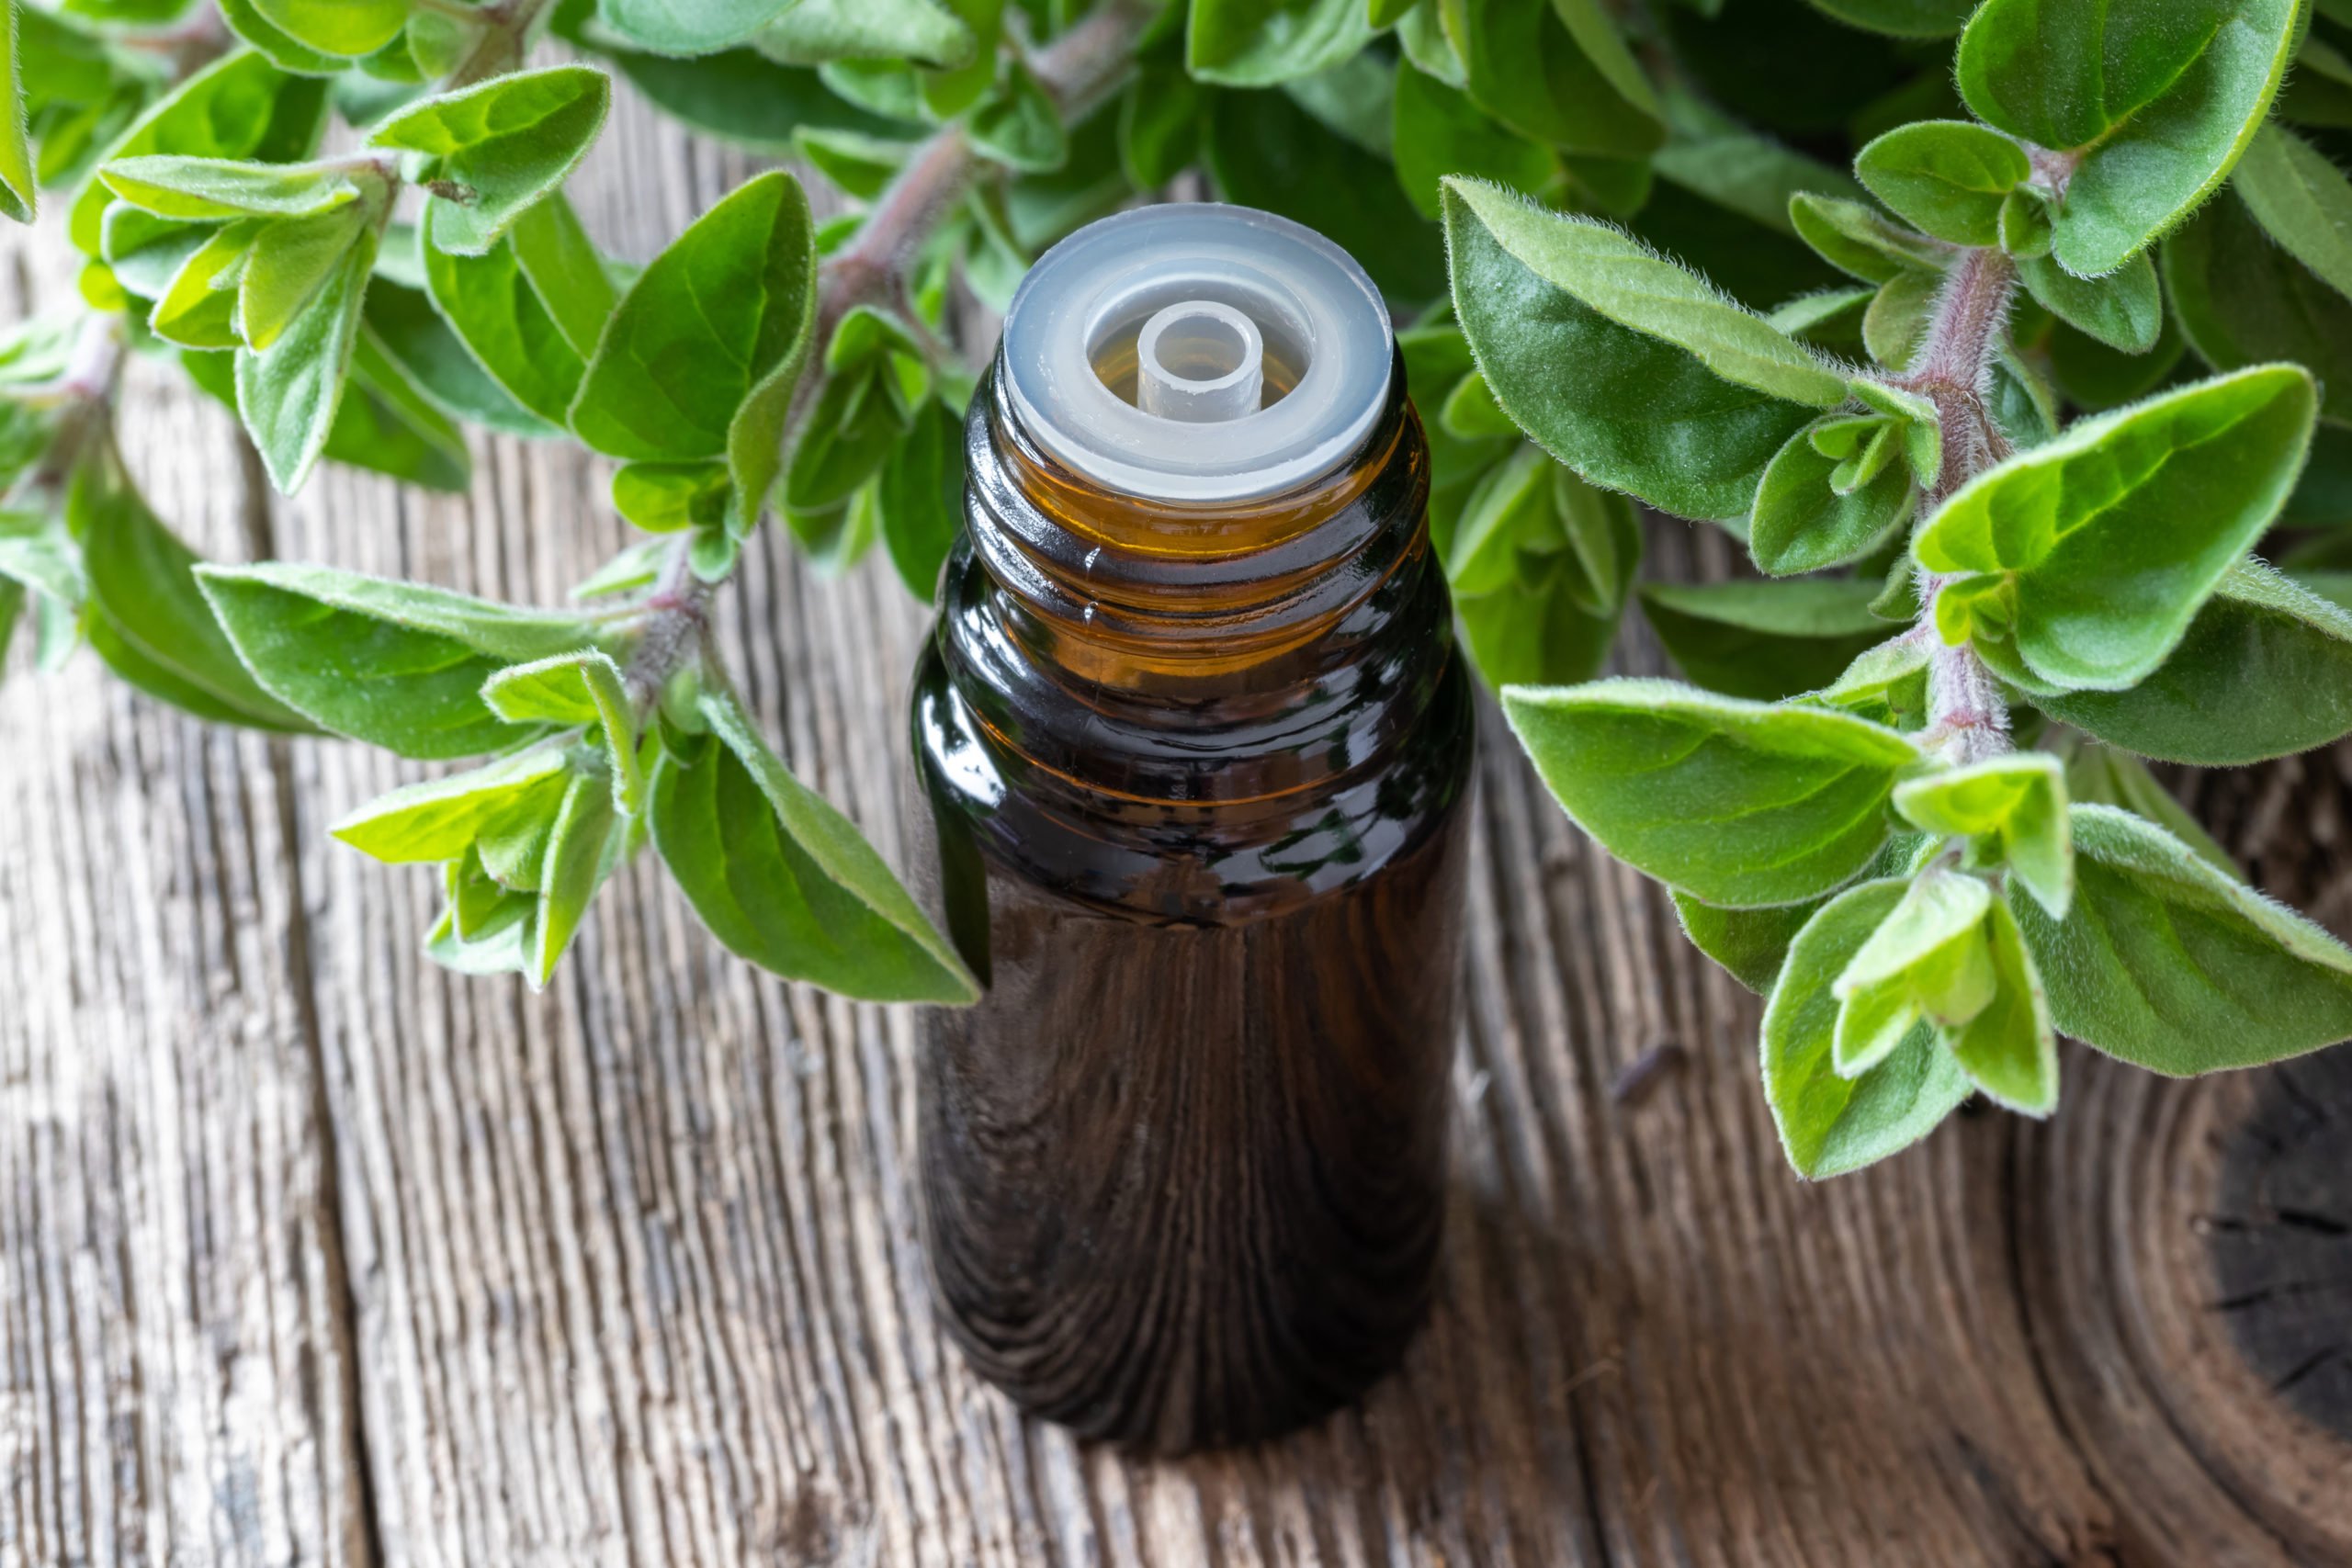 6 Benefits of Oregano Essential Oil: Nature’s Antibiotic Helps with Yeast Infections, Parasites, Digestion & More